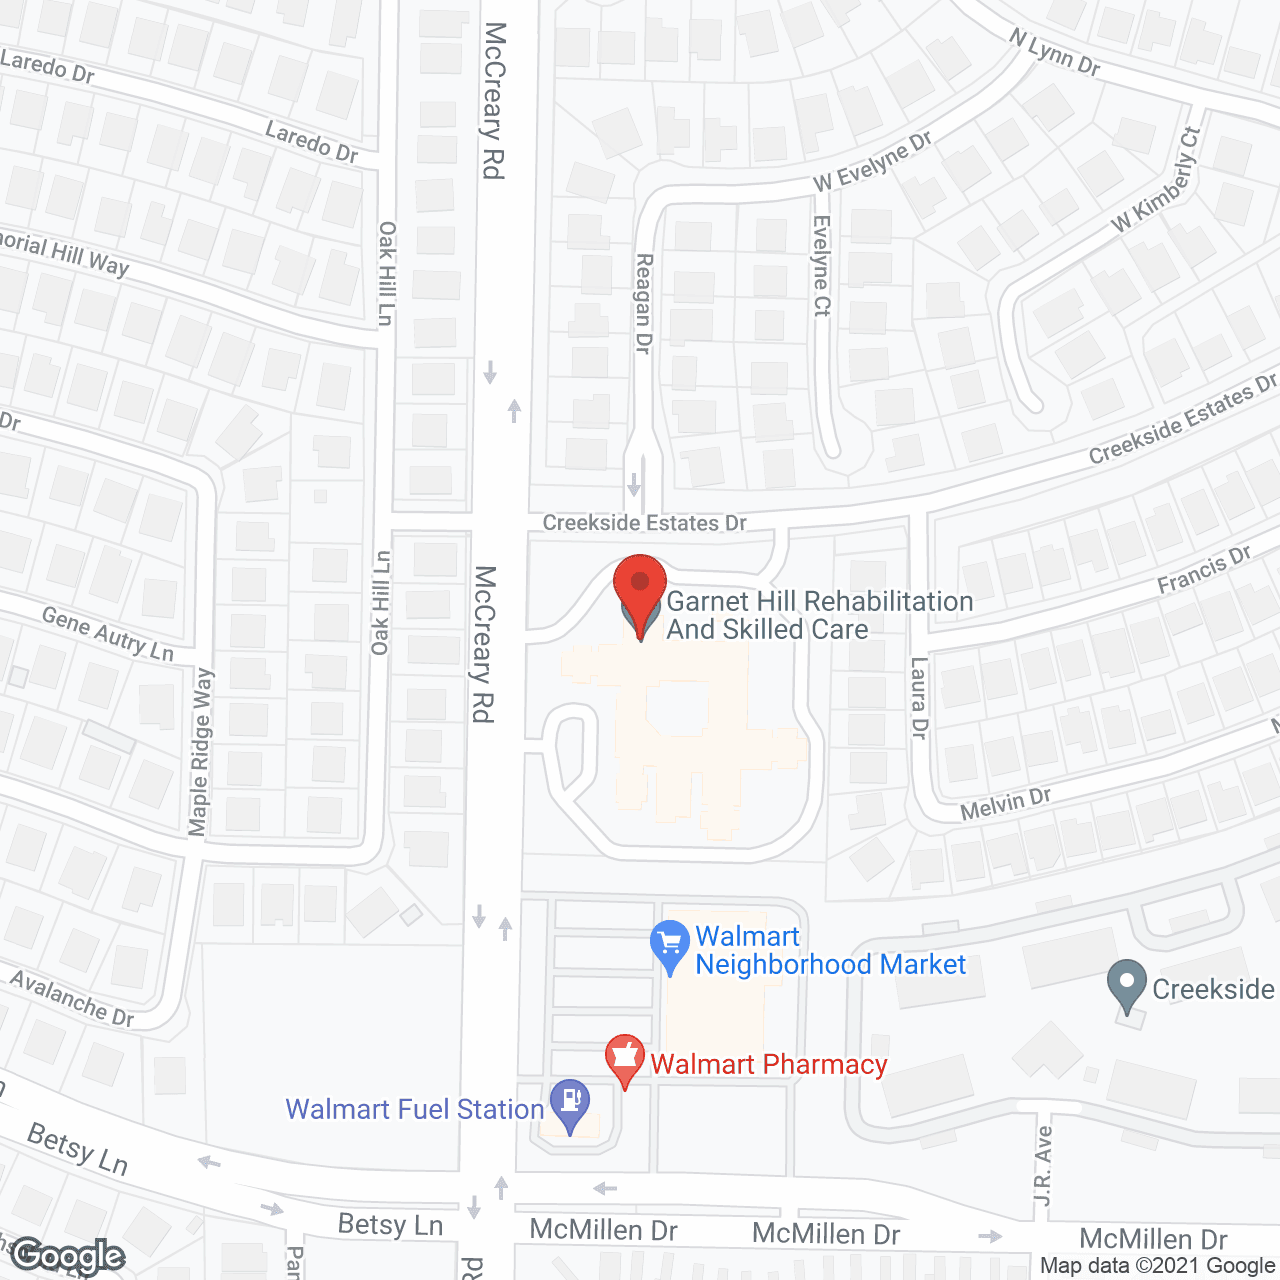 Garnet Hill Rehabilitation And Skilled Care in google map